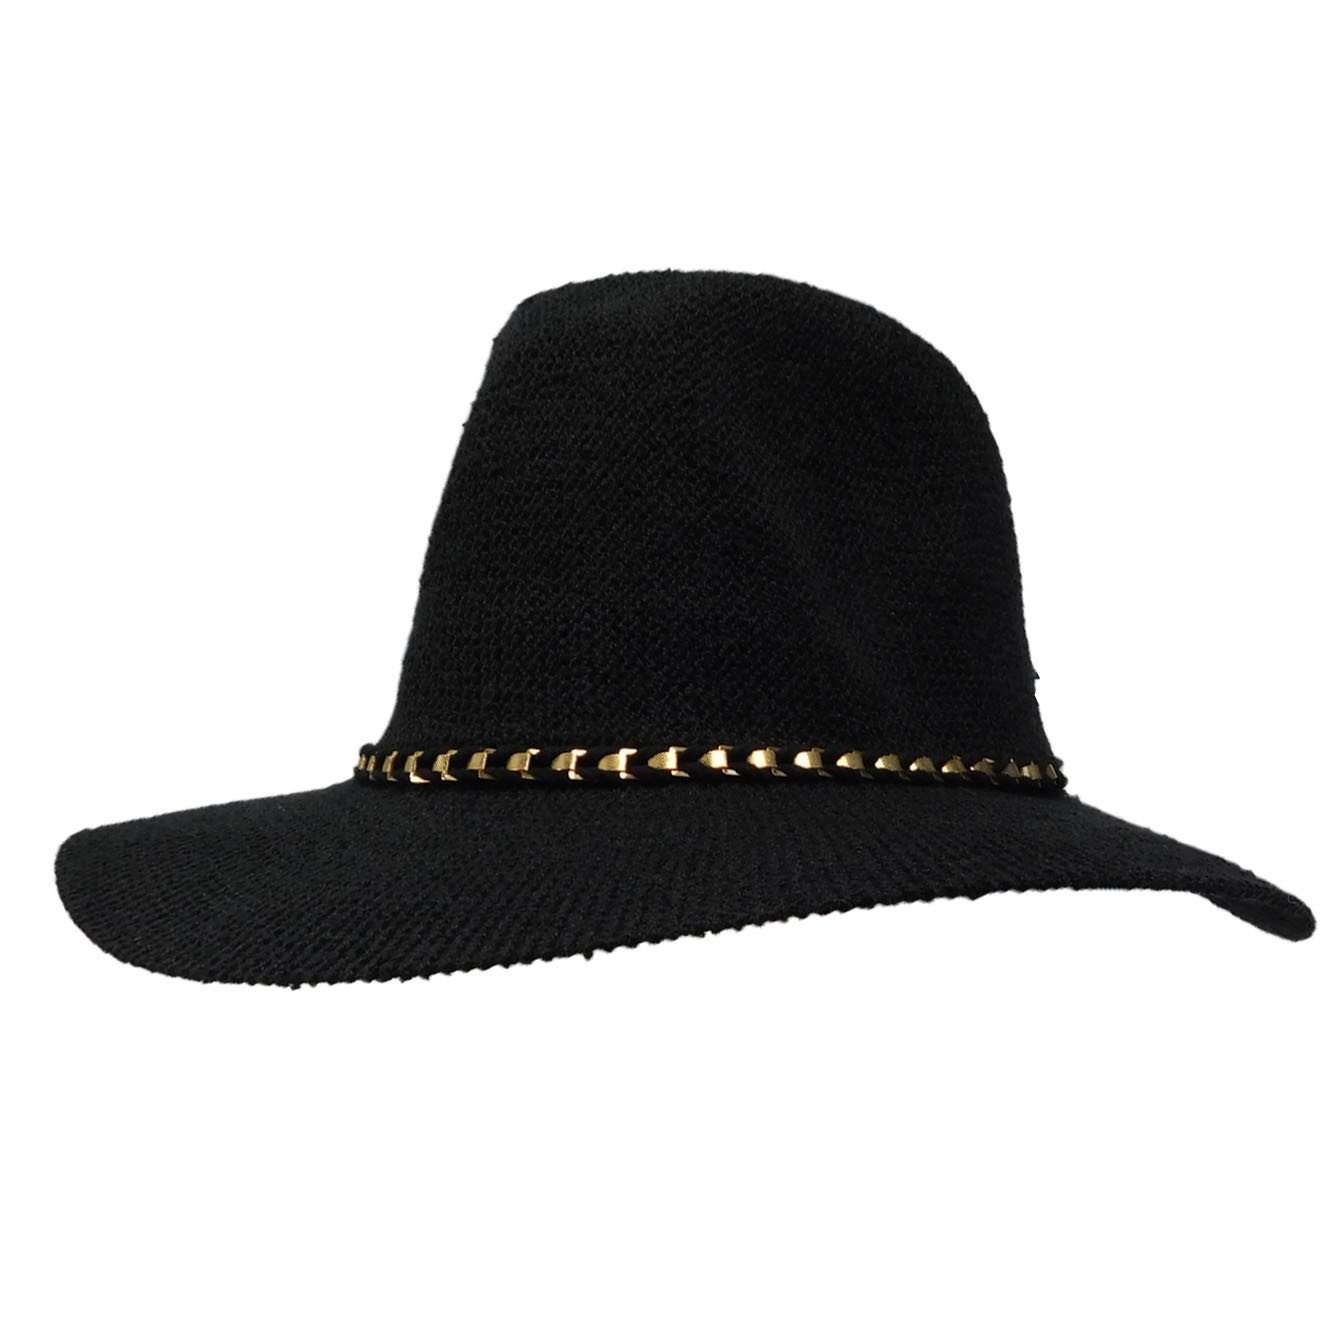 Knitted Panama Hat with Gold Band - Black Safari Hat Boardwalk Style Hats    